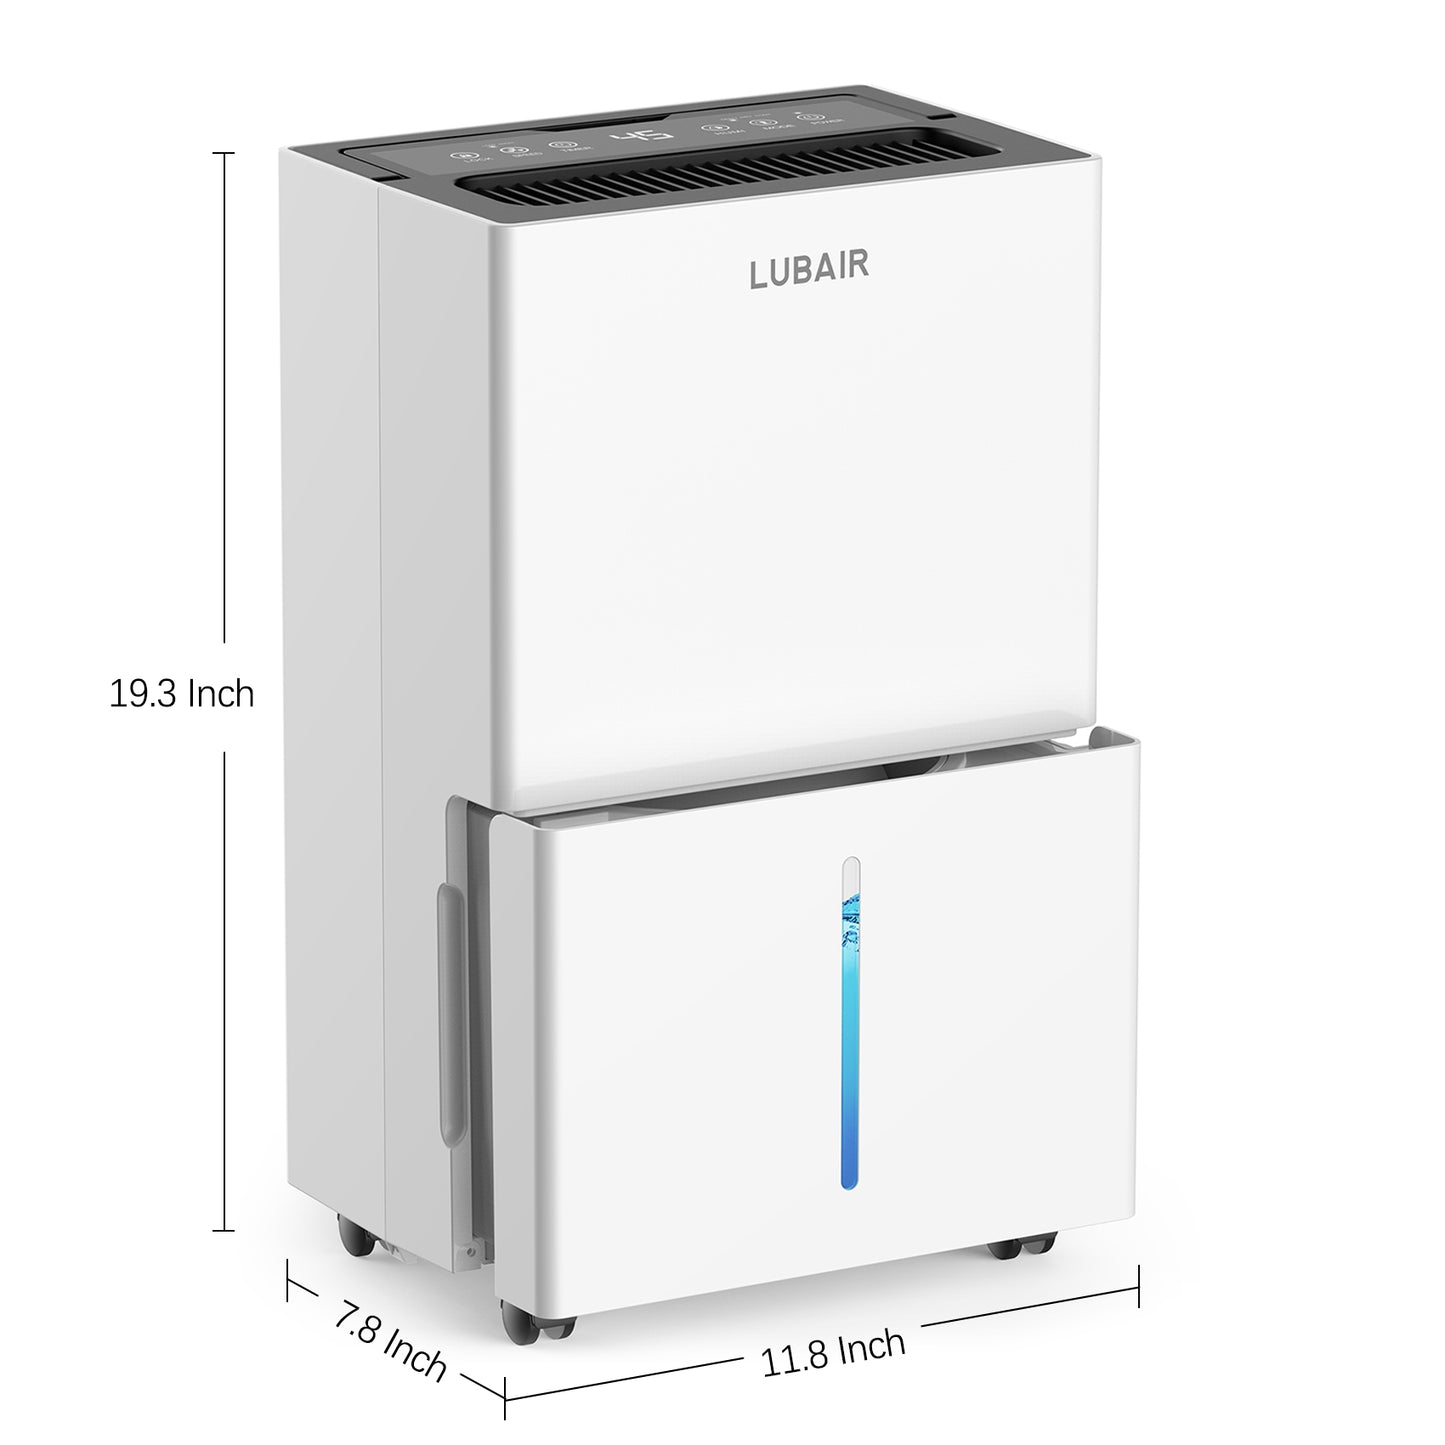 LUBAIR 22 Pints Portable Dehumidifier for Basements and Homes with Drain Hose, Covers up to 600 Sq Ft, Removes up to 50 Pints of Moisture per Day (95°F, 95% RH)